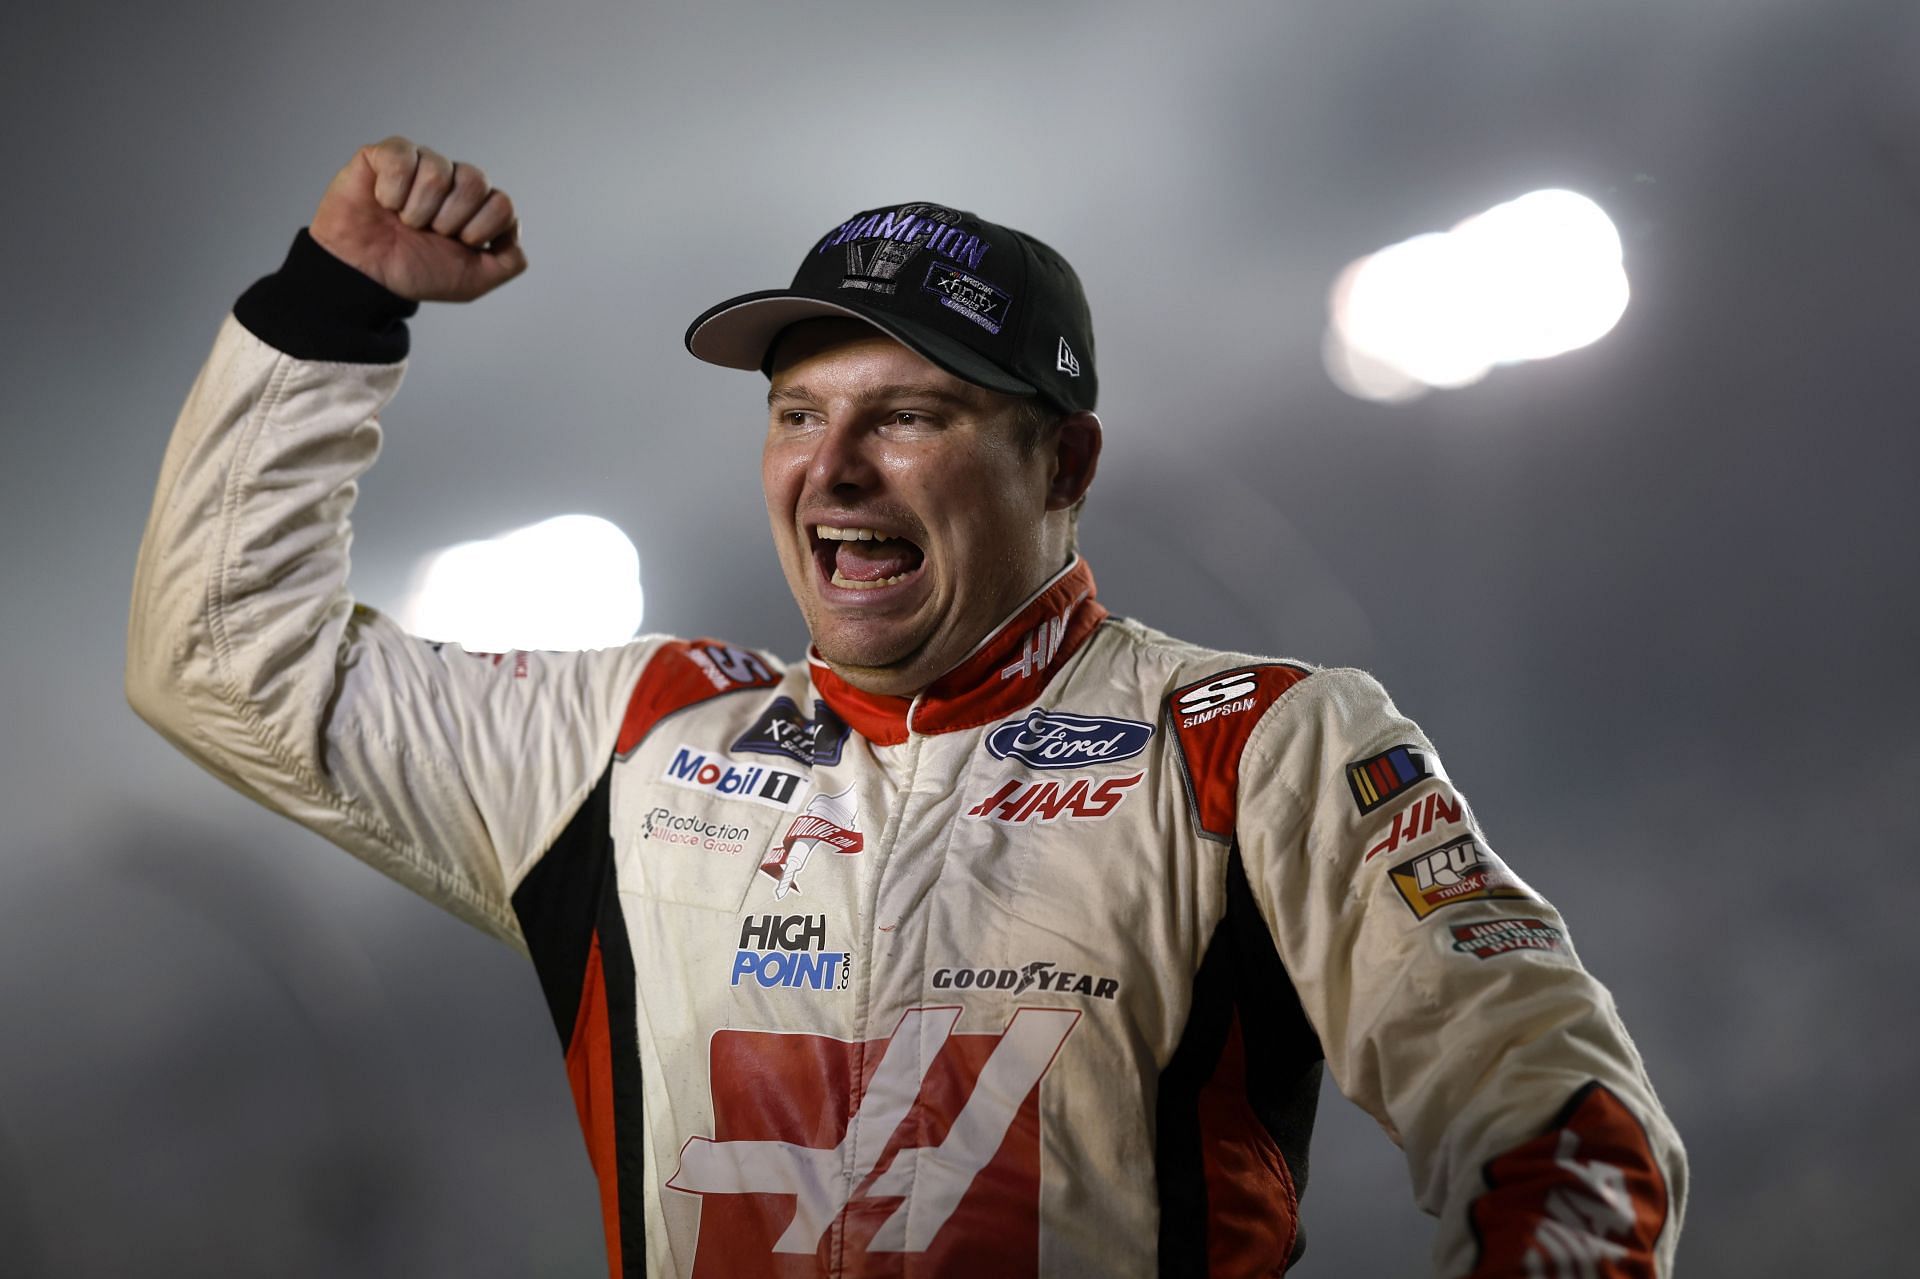 Cole Custer to be sponsored by Andy’s Frozen Custard as SHR driver